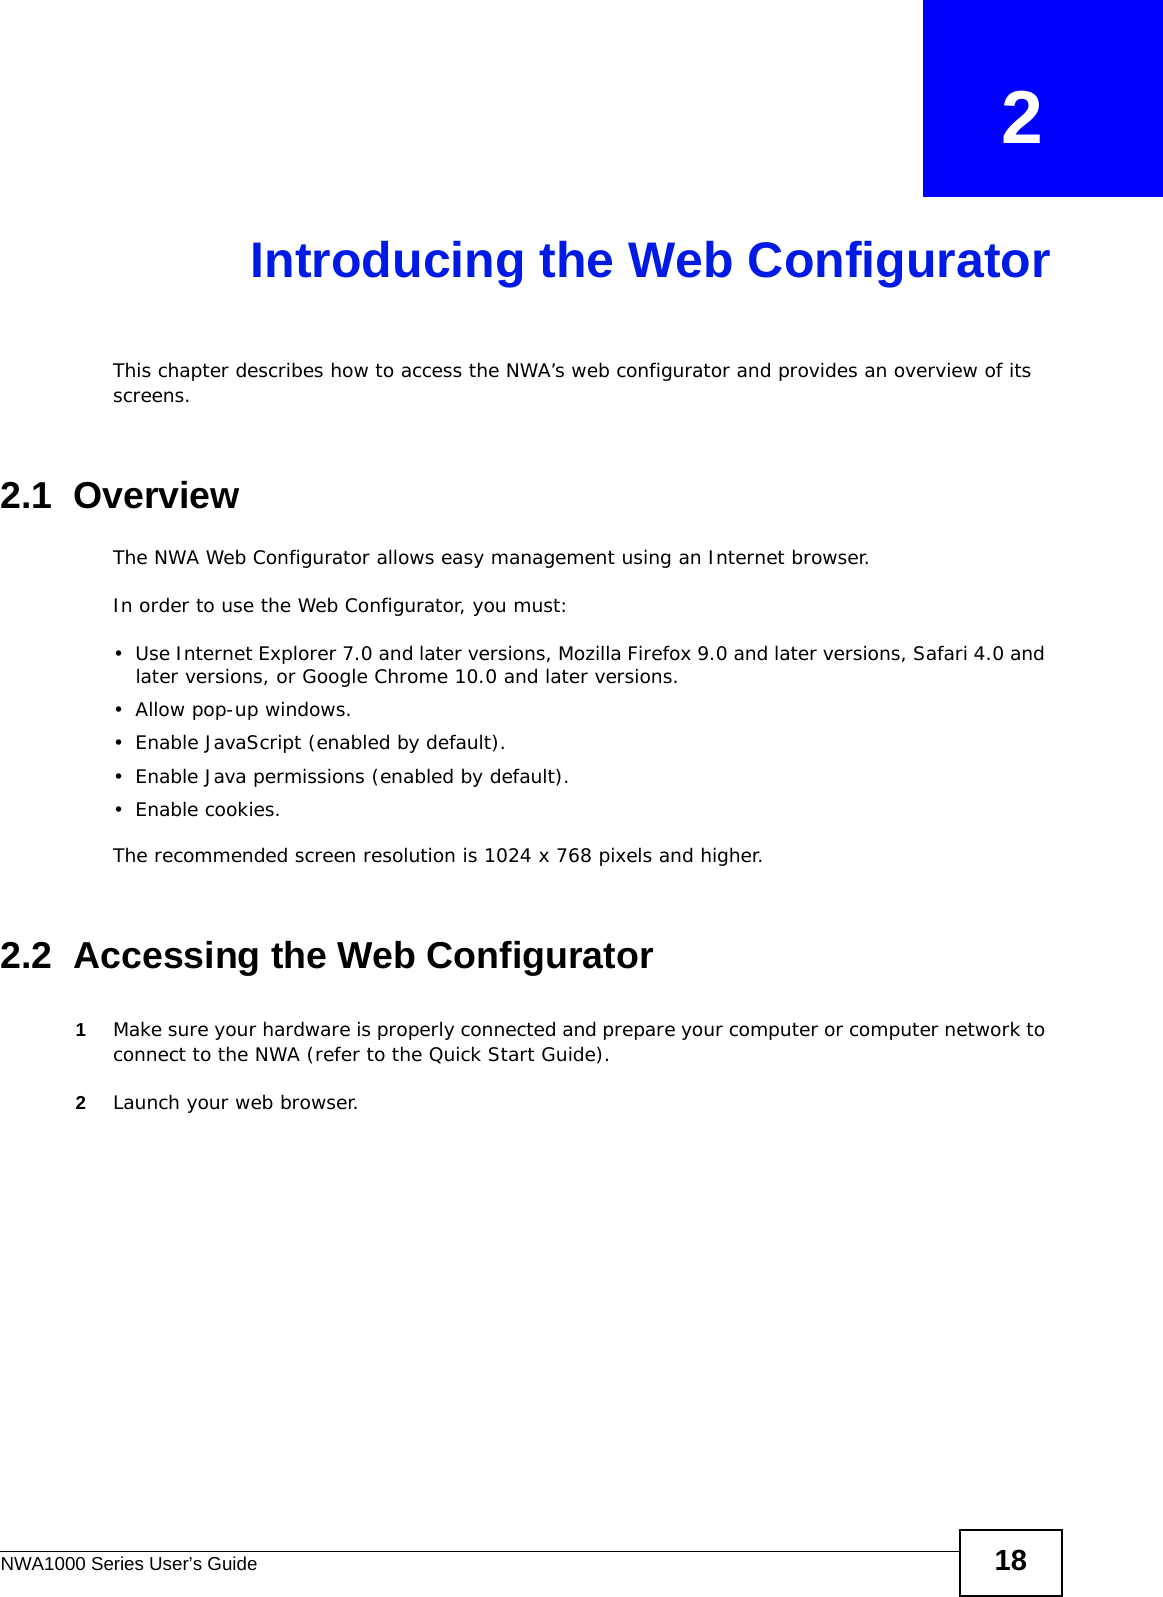 NWA1000 Series User’s Guide 18CHAPTER   2Introducing the Web ConfiguratorThis chapter describes how to access the NWA’s web configurator and provides an overview of its screens. 2.1  OverviewThe NWA Web Configurator allows easy management using an Internet browser. In order to use the Web Configurator, you must:• Use Internet Explorer 7.0 and later versions, Mozilla Firefox 9.0 and later versions, Safari 4.0 and later versions, or Google Chrome 10.0 and later versions.• Allow pop-up windows.• Enable JavaScript (enabled by default).• Enable Java permissions (enabled by default).• Enable cookies.The recommended screen resolution is 1024 x 768 pixels and higher.2.2  Accessing the Web Configurator1Make sure your hardware is properly connected and prepare your computer or computer network to connect to the NWA (refer to the Quick Start Guide).2Launch your web browser.